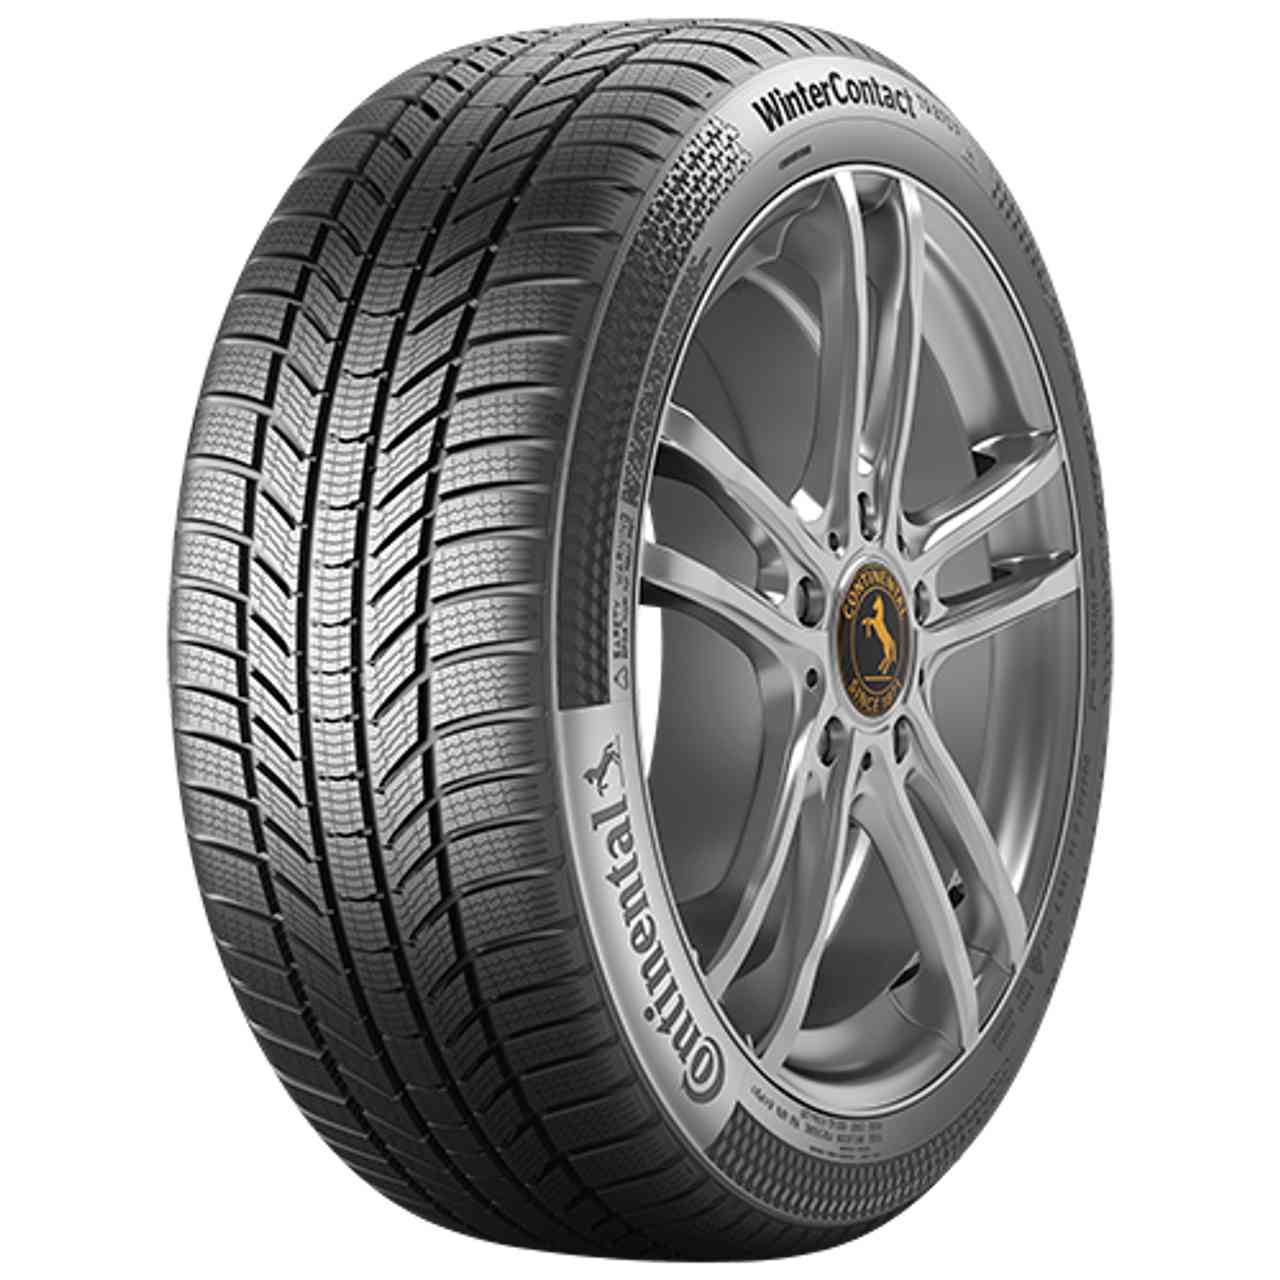 CONTINENTAL WINTERCONTACT TS 870 P (EVc) 235/55R18 100H FR BSW